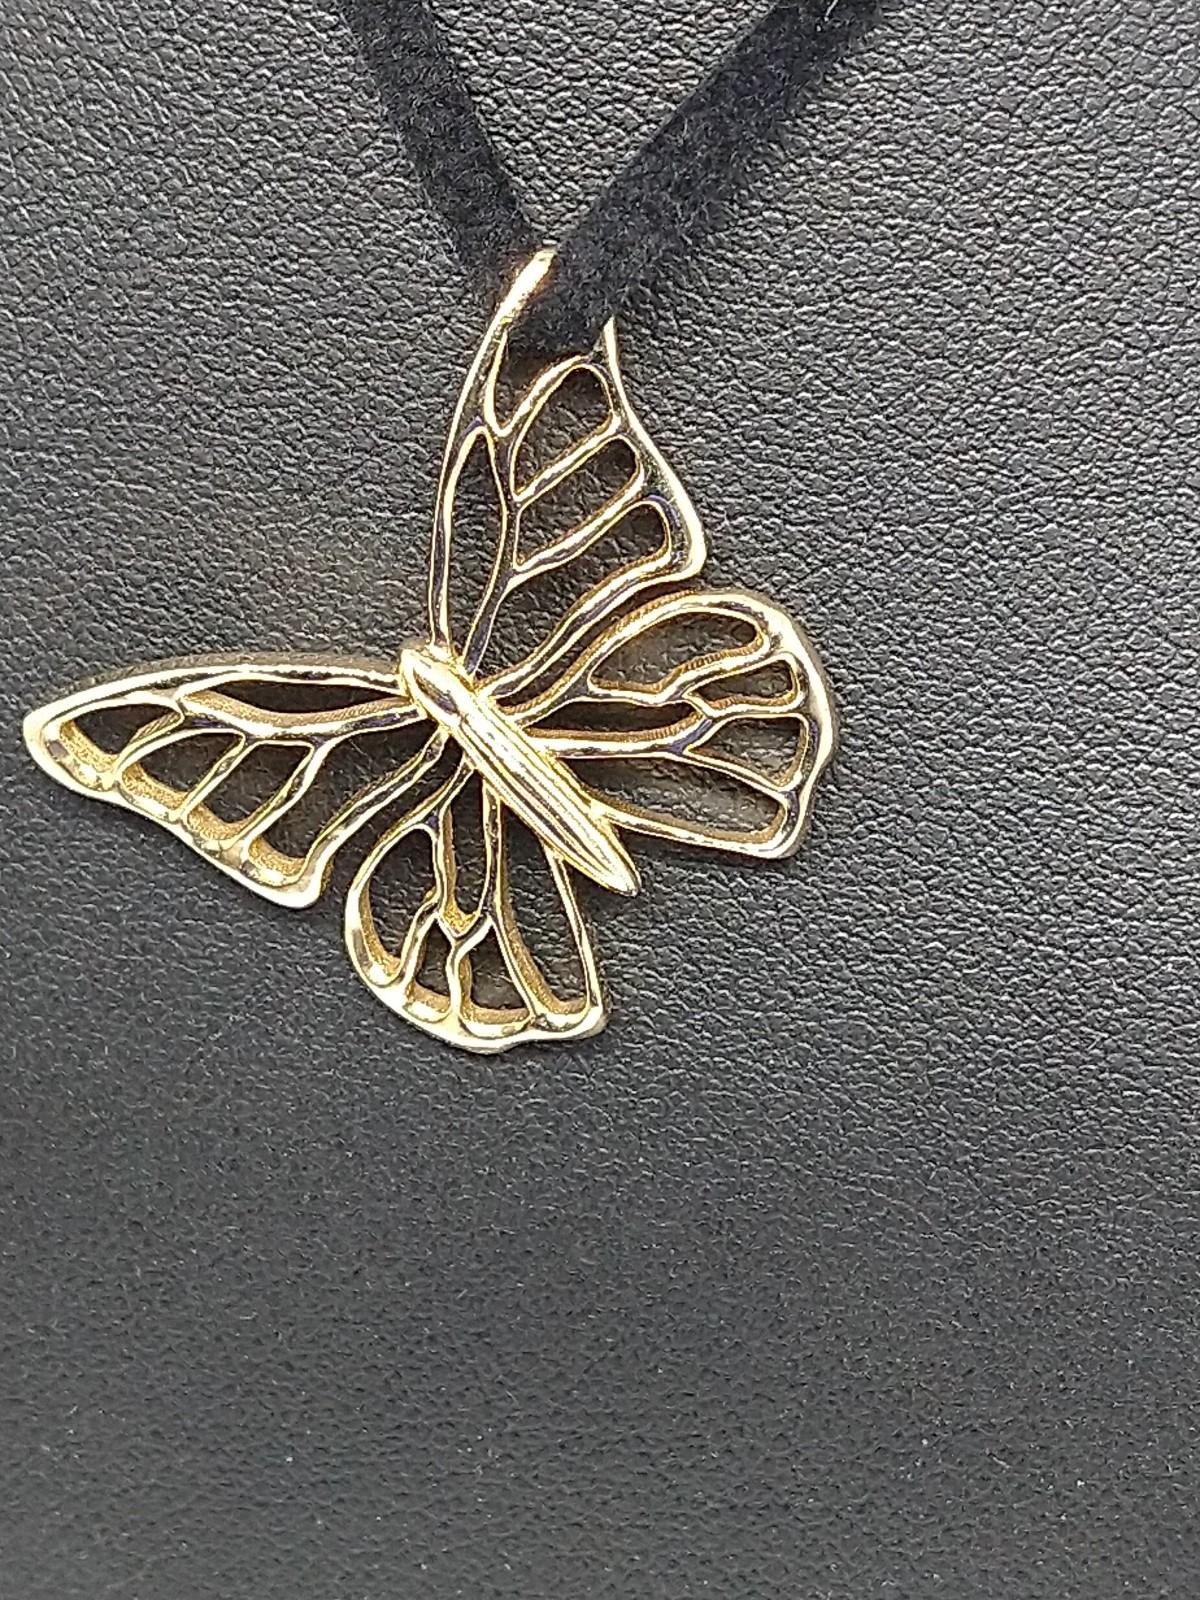 14 Karat Yellow Gold Petite Monarch Butterfly Pendant Necklace, Tiffany Designer, Thomas Kurilla sculpted this butterfly pendant for the new Fall season. Butterflies have always captured the imagination of designers with their amazing patterns and